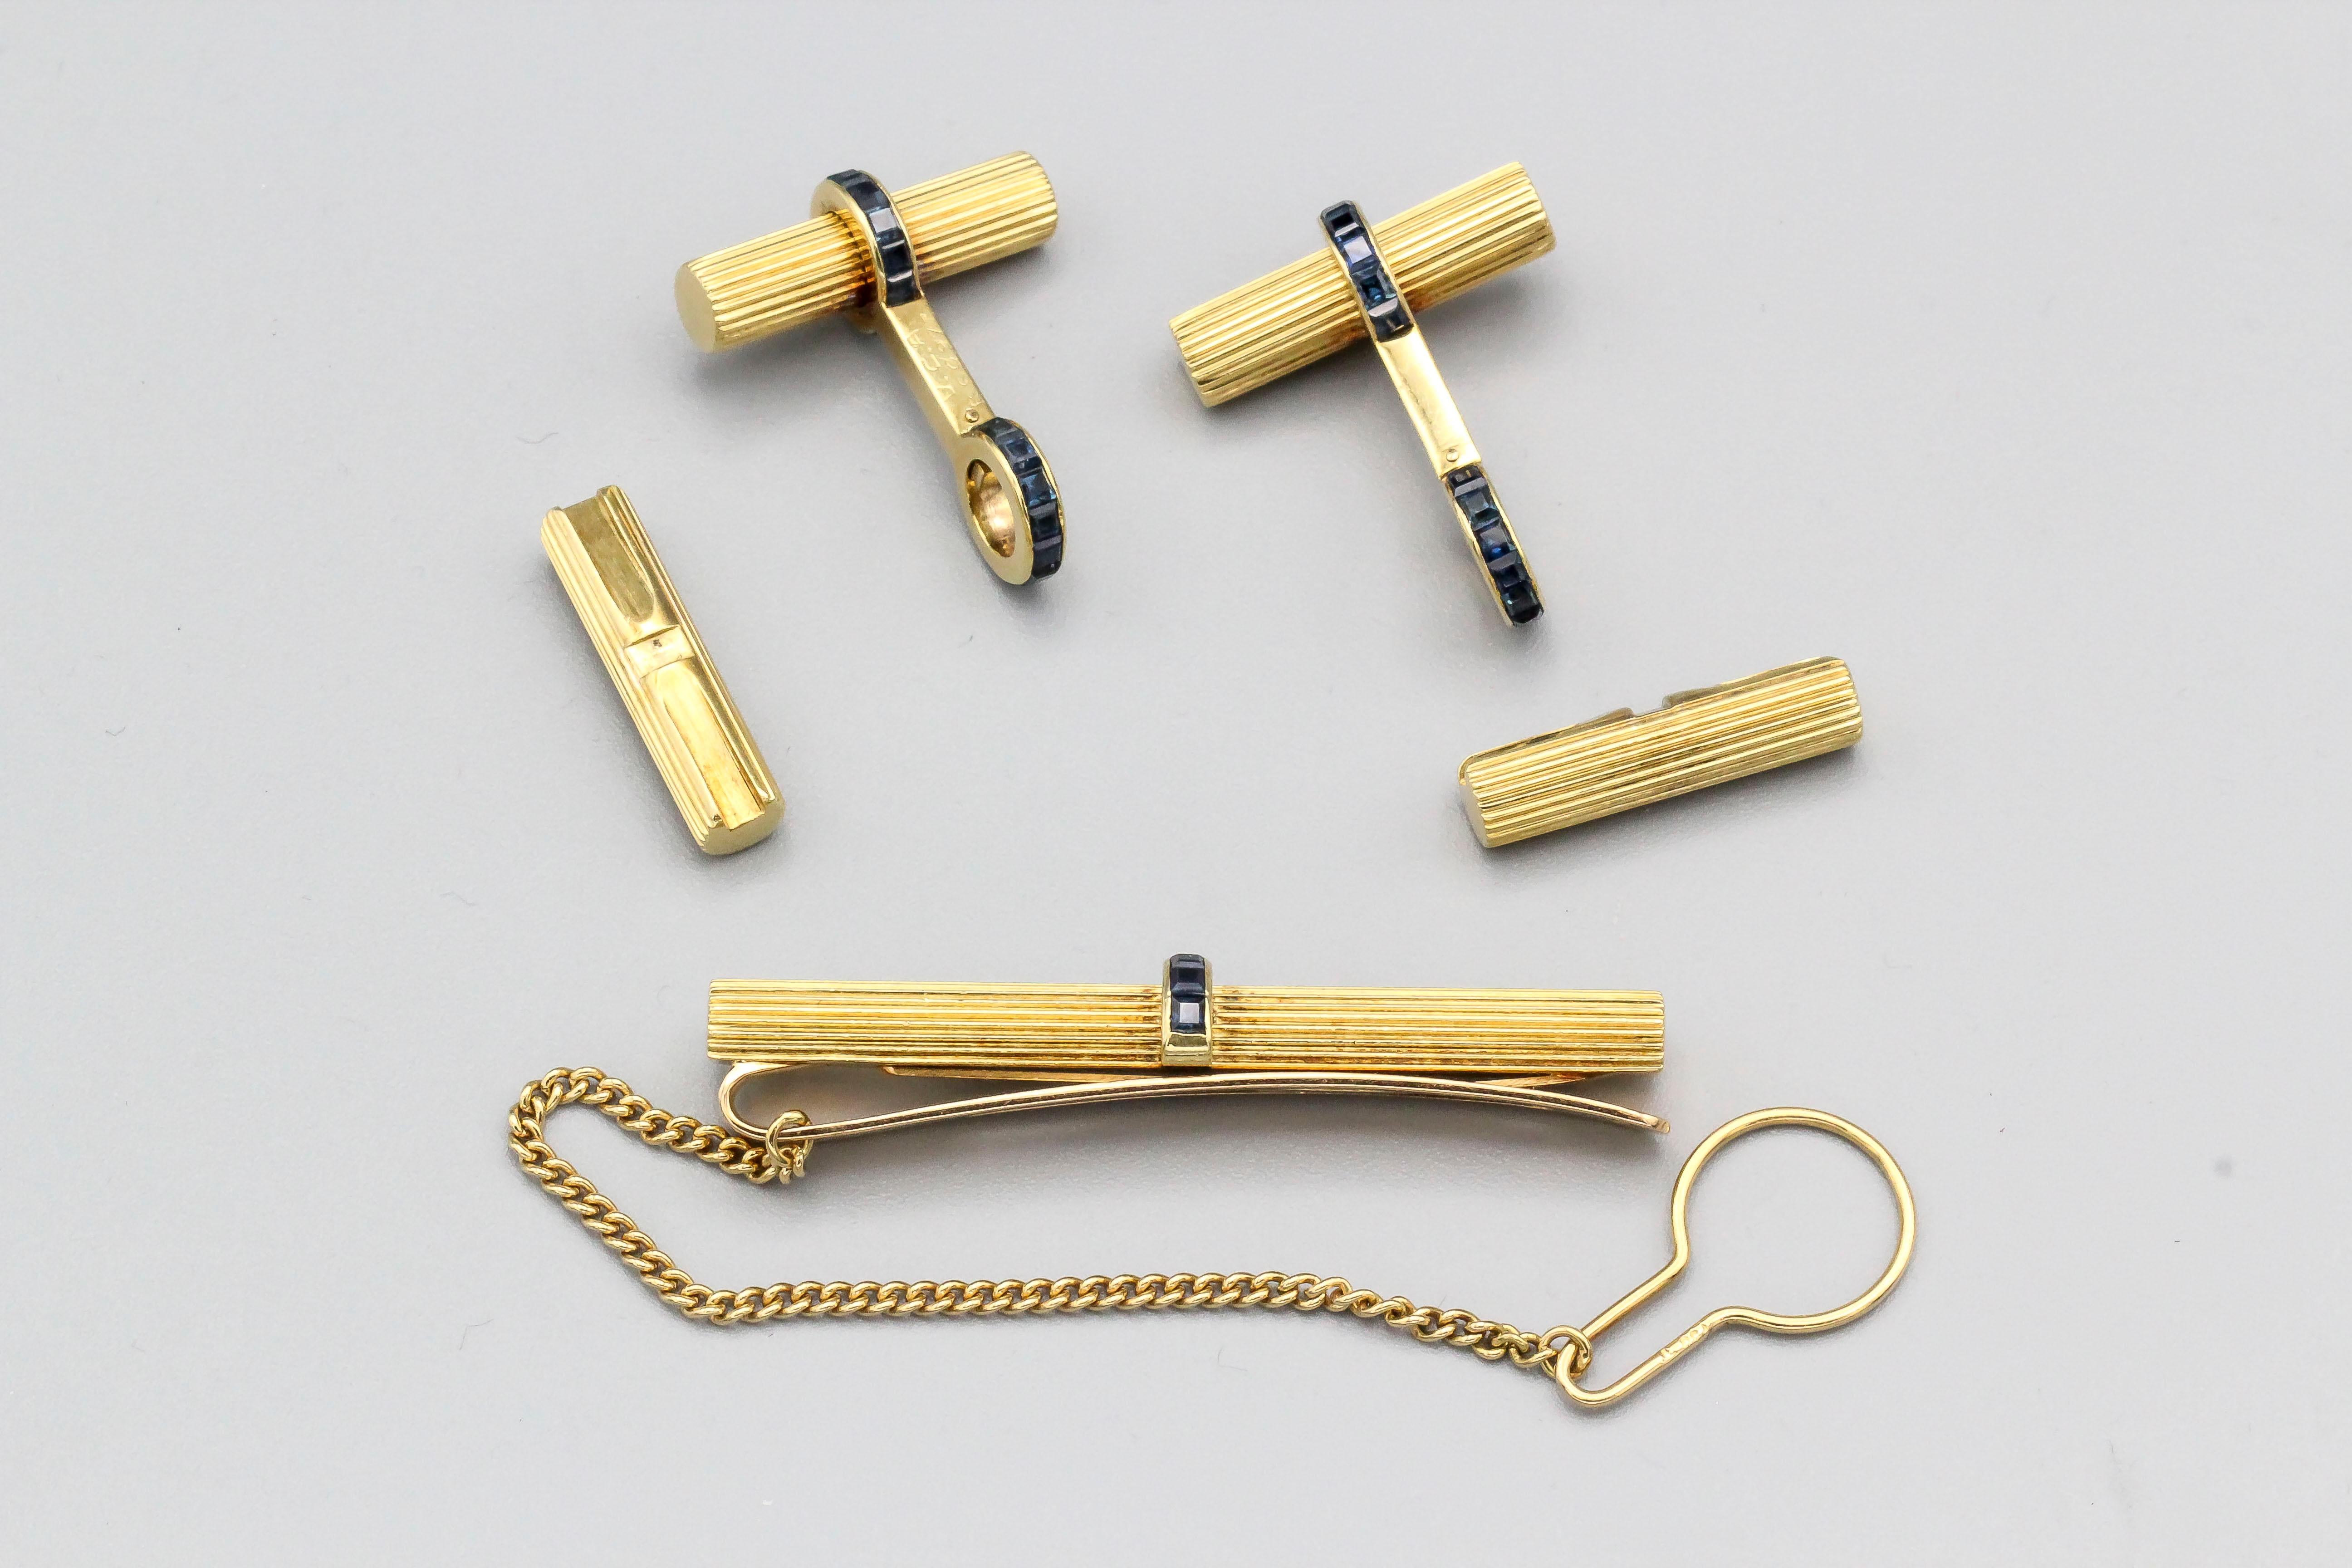 Very handsome sapphire and 18K yellow gold bar cufflinks and tie bar by Van Cleef & Arpels, circa 1960s-70s. They resemble ribbed gold bars, with rich blue sapphires. One end of the bars twists off for ease of installation. Tie bar follows same